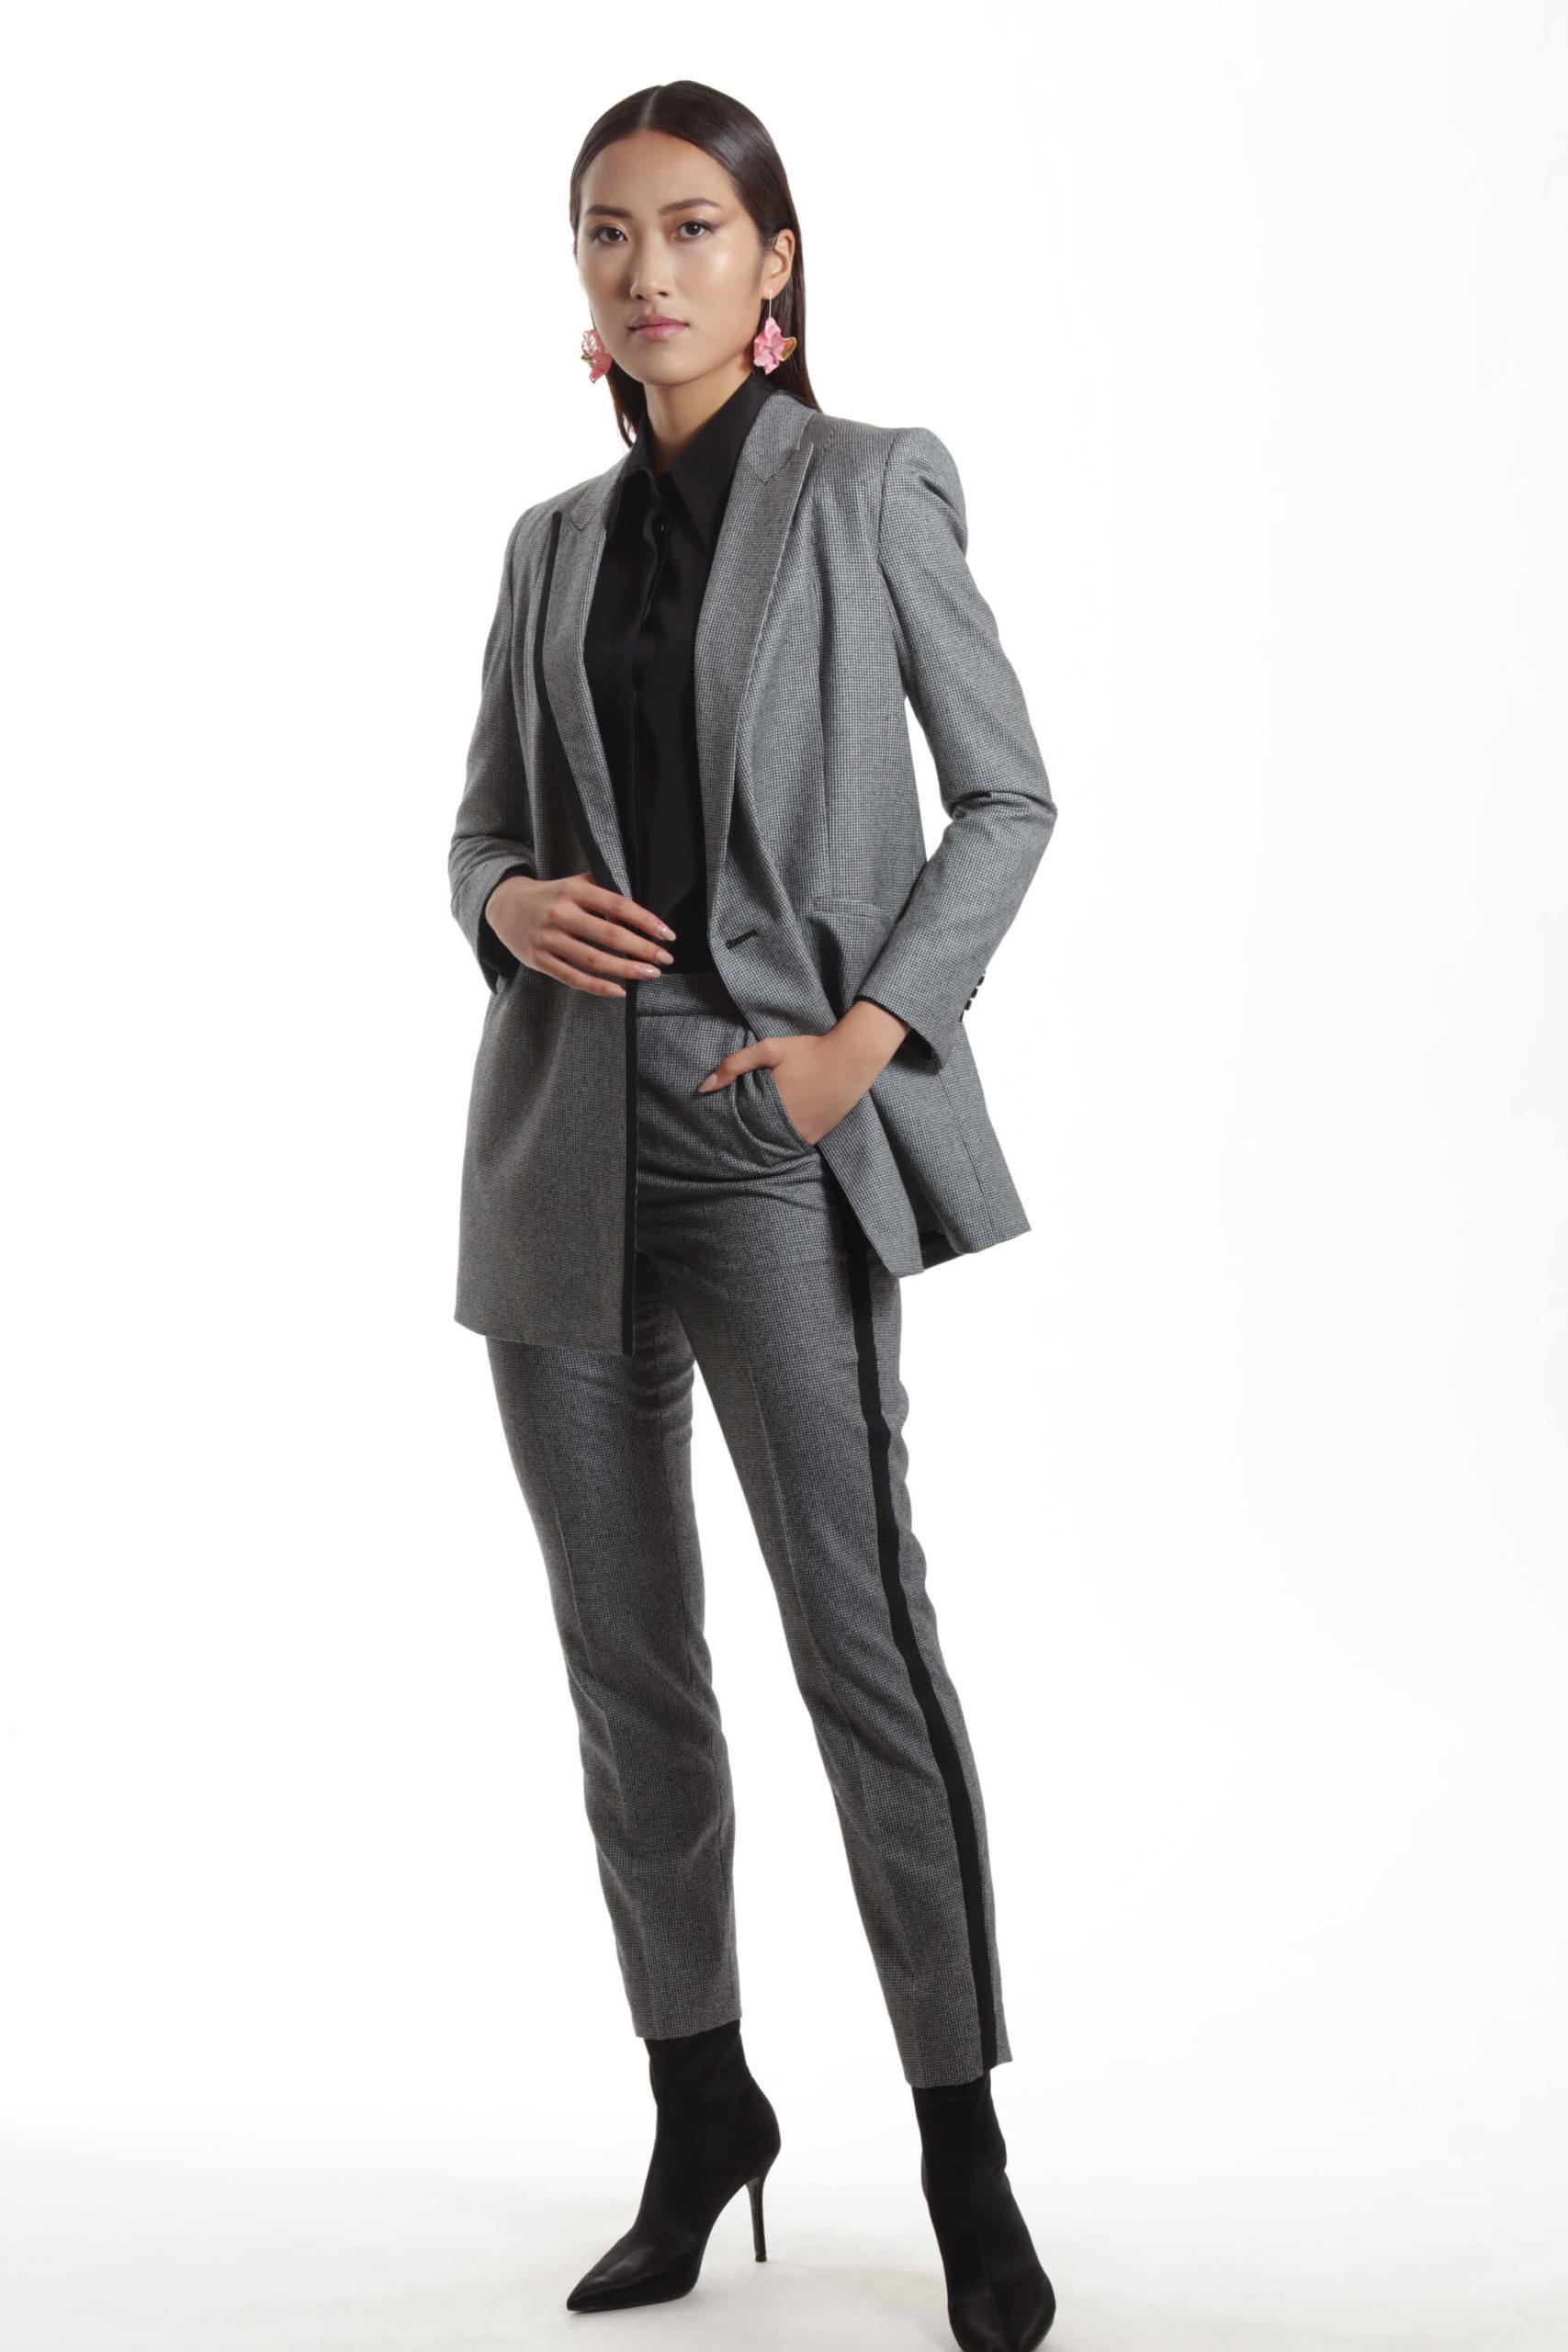 Marseille – Relaxed fit wool suit jacket in black and white houndstooth